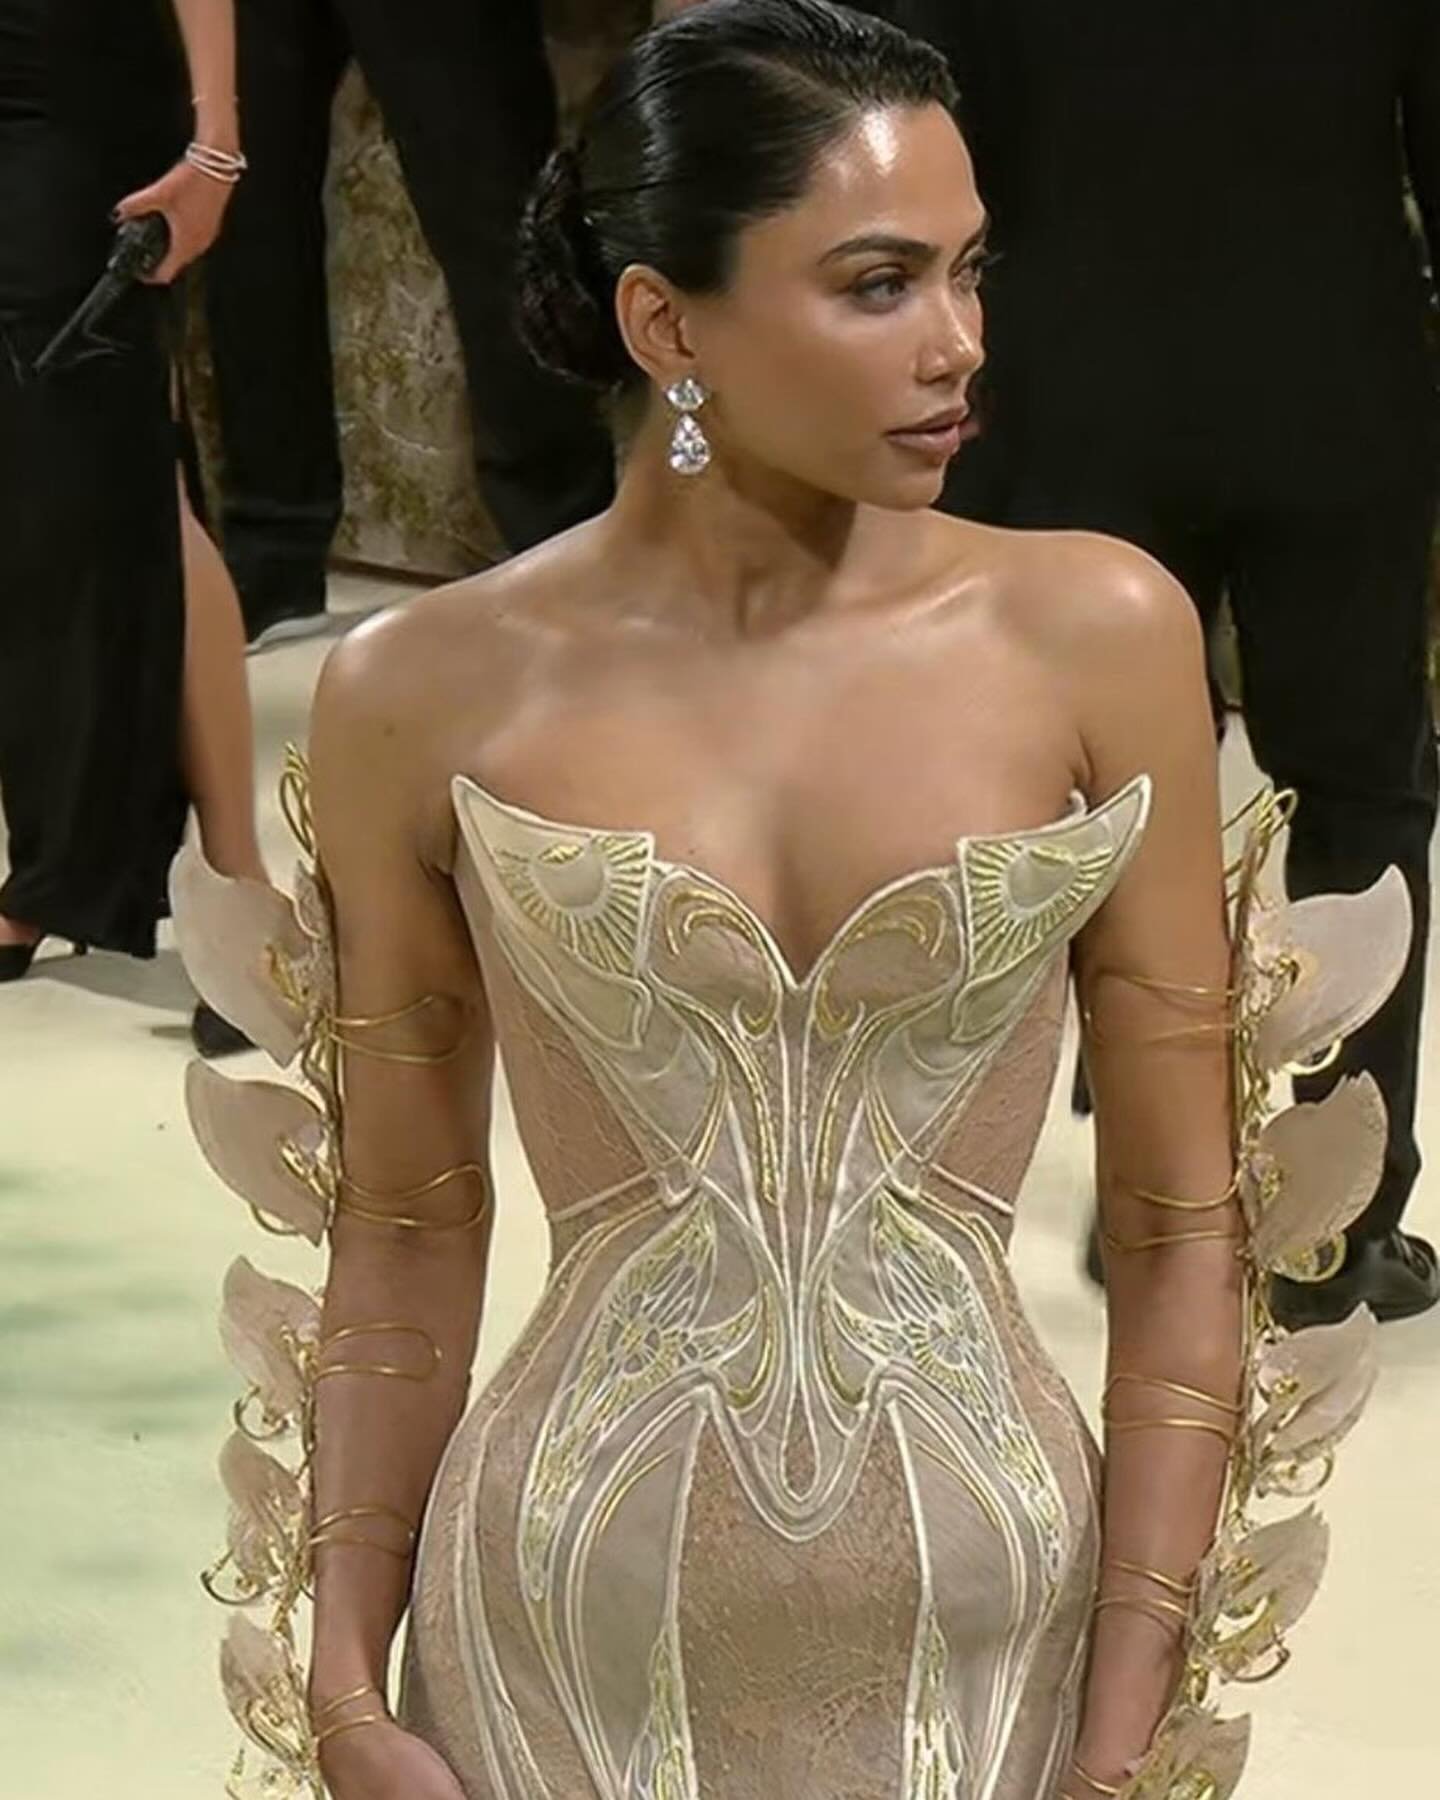 10 stand out, show-stopping looks from the Met Gala 2024, for the theme &ldquo;A Garden of Time&rdquo;, though a mere ten doesn&rsquo;t do justice to the visionary looks - did you have a favourite?